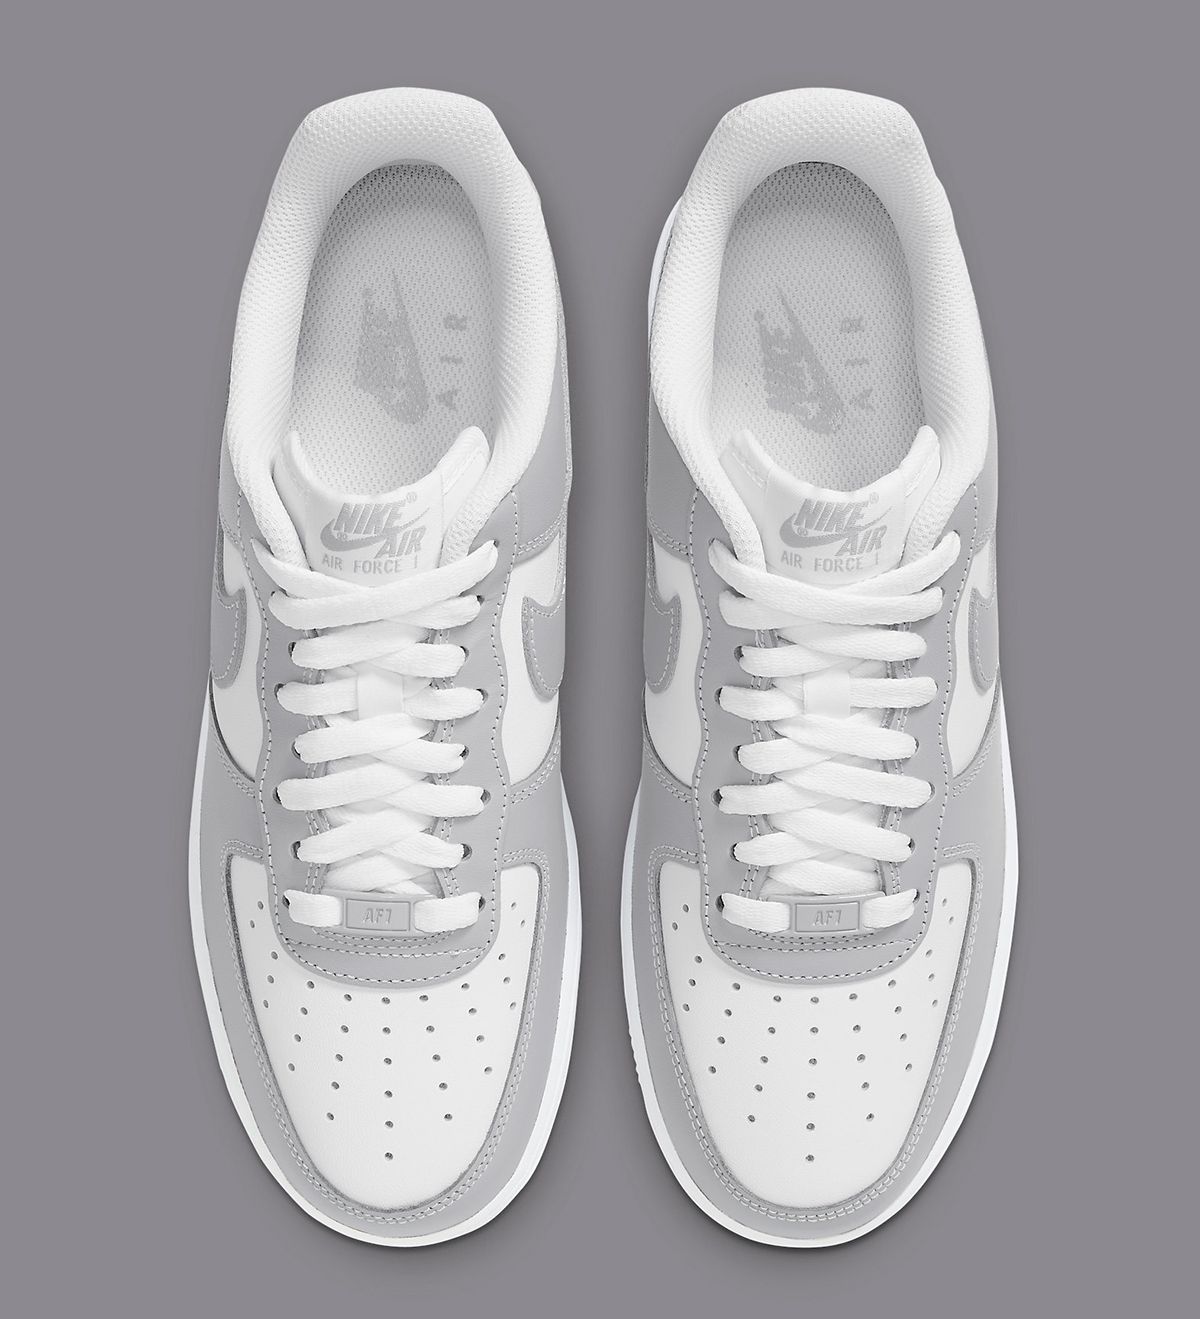 The Nike Air Force 1 Low Appears in Simple Grey and White Garb | HOUSE ...